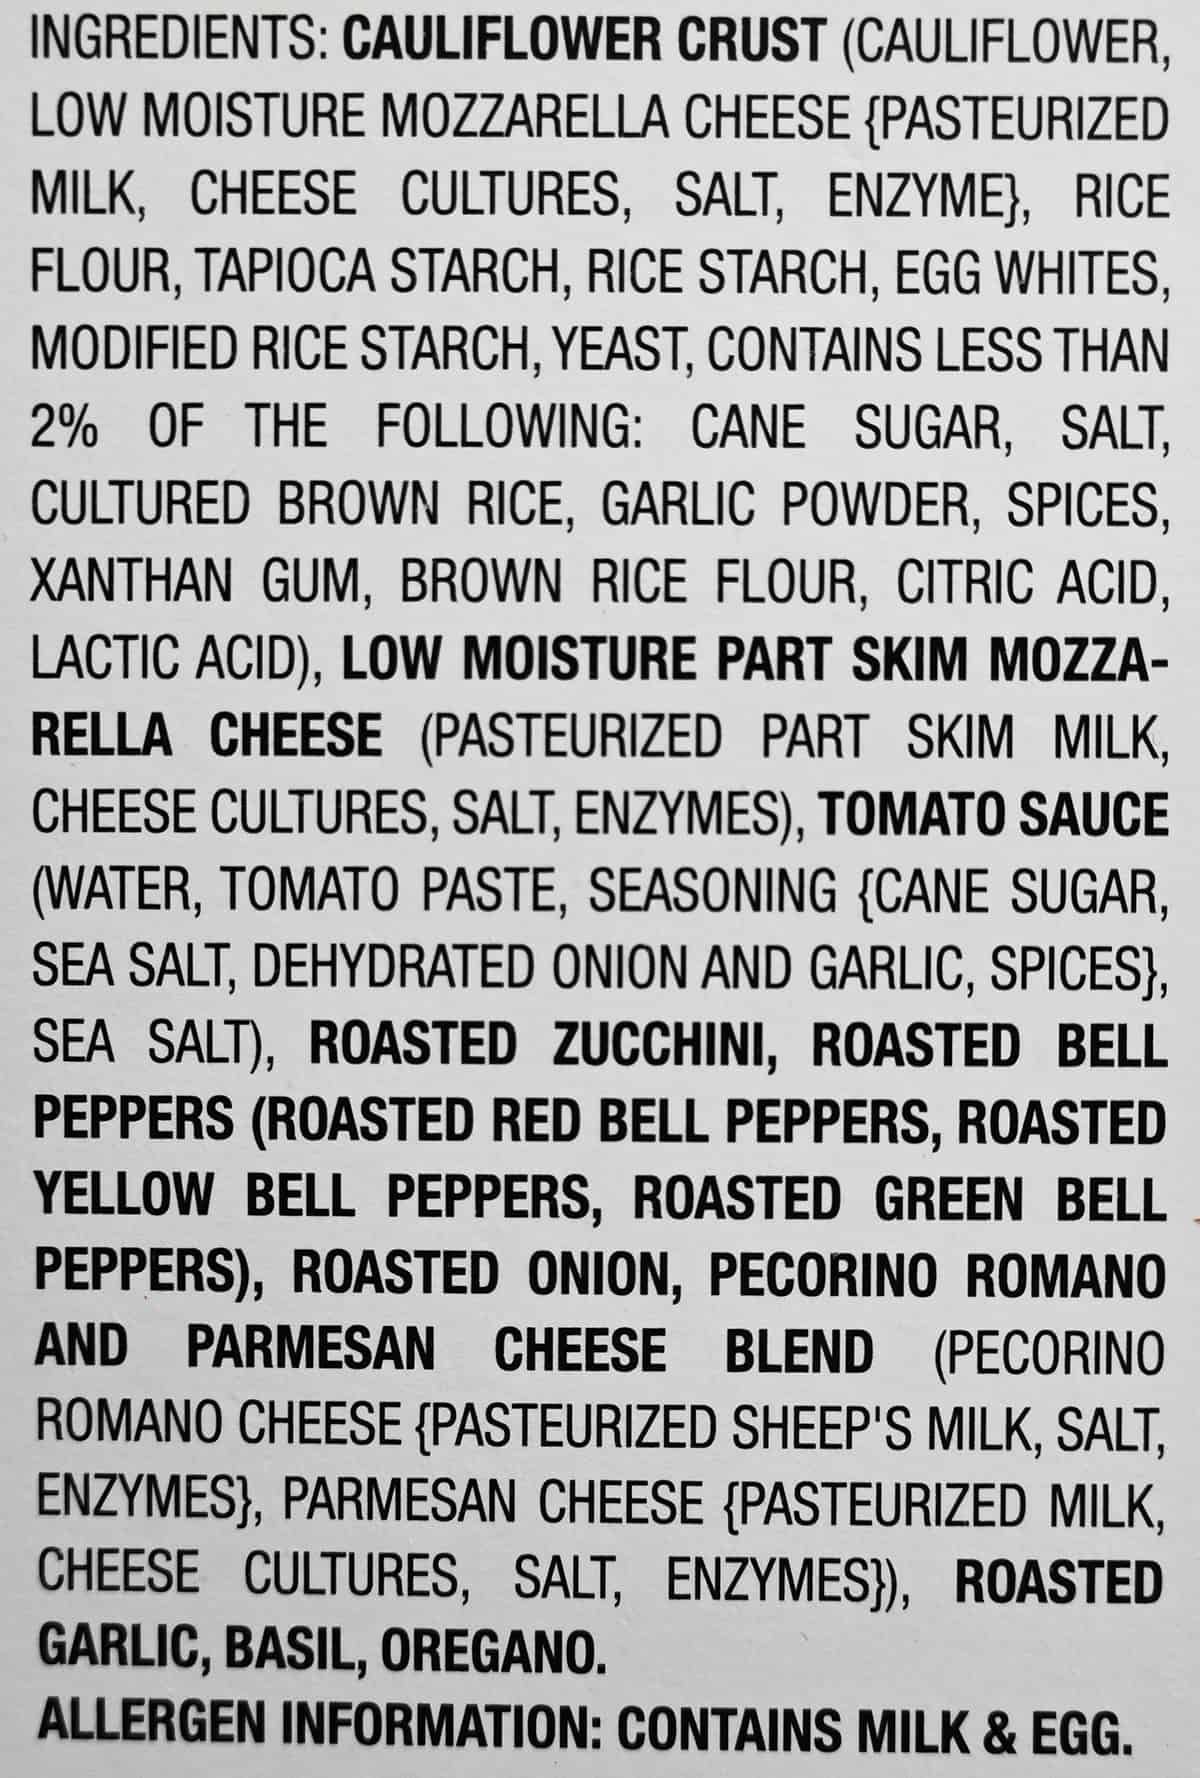 Image of the ingredients list for the pizza.